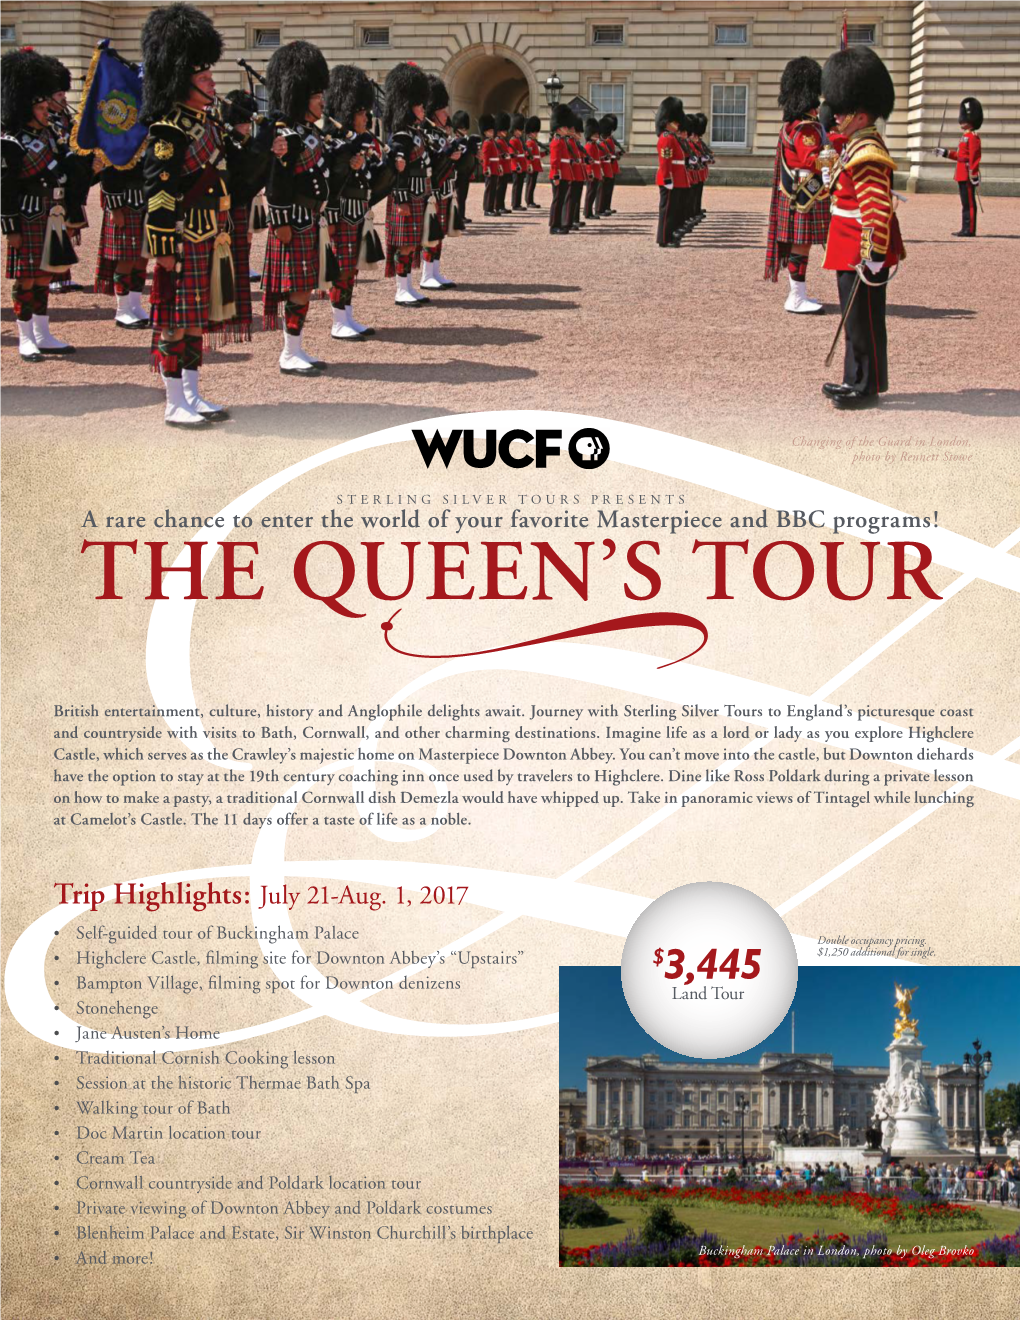 The Queen's Tour